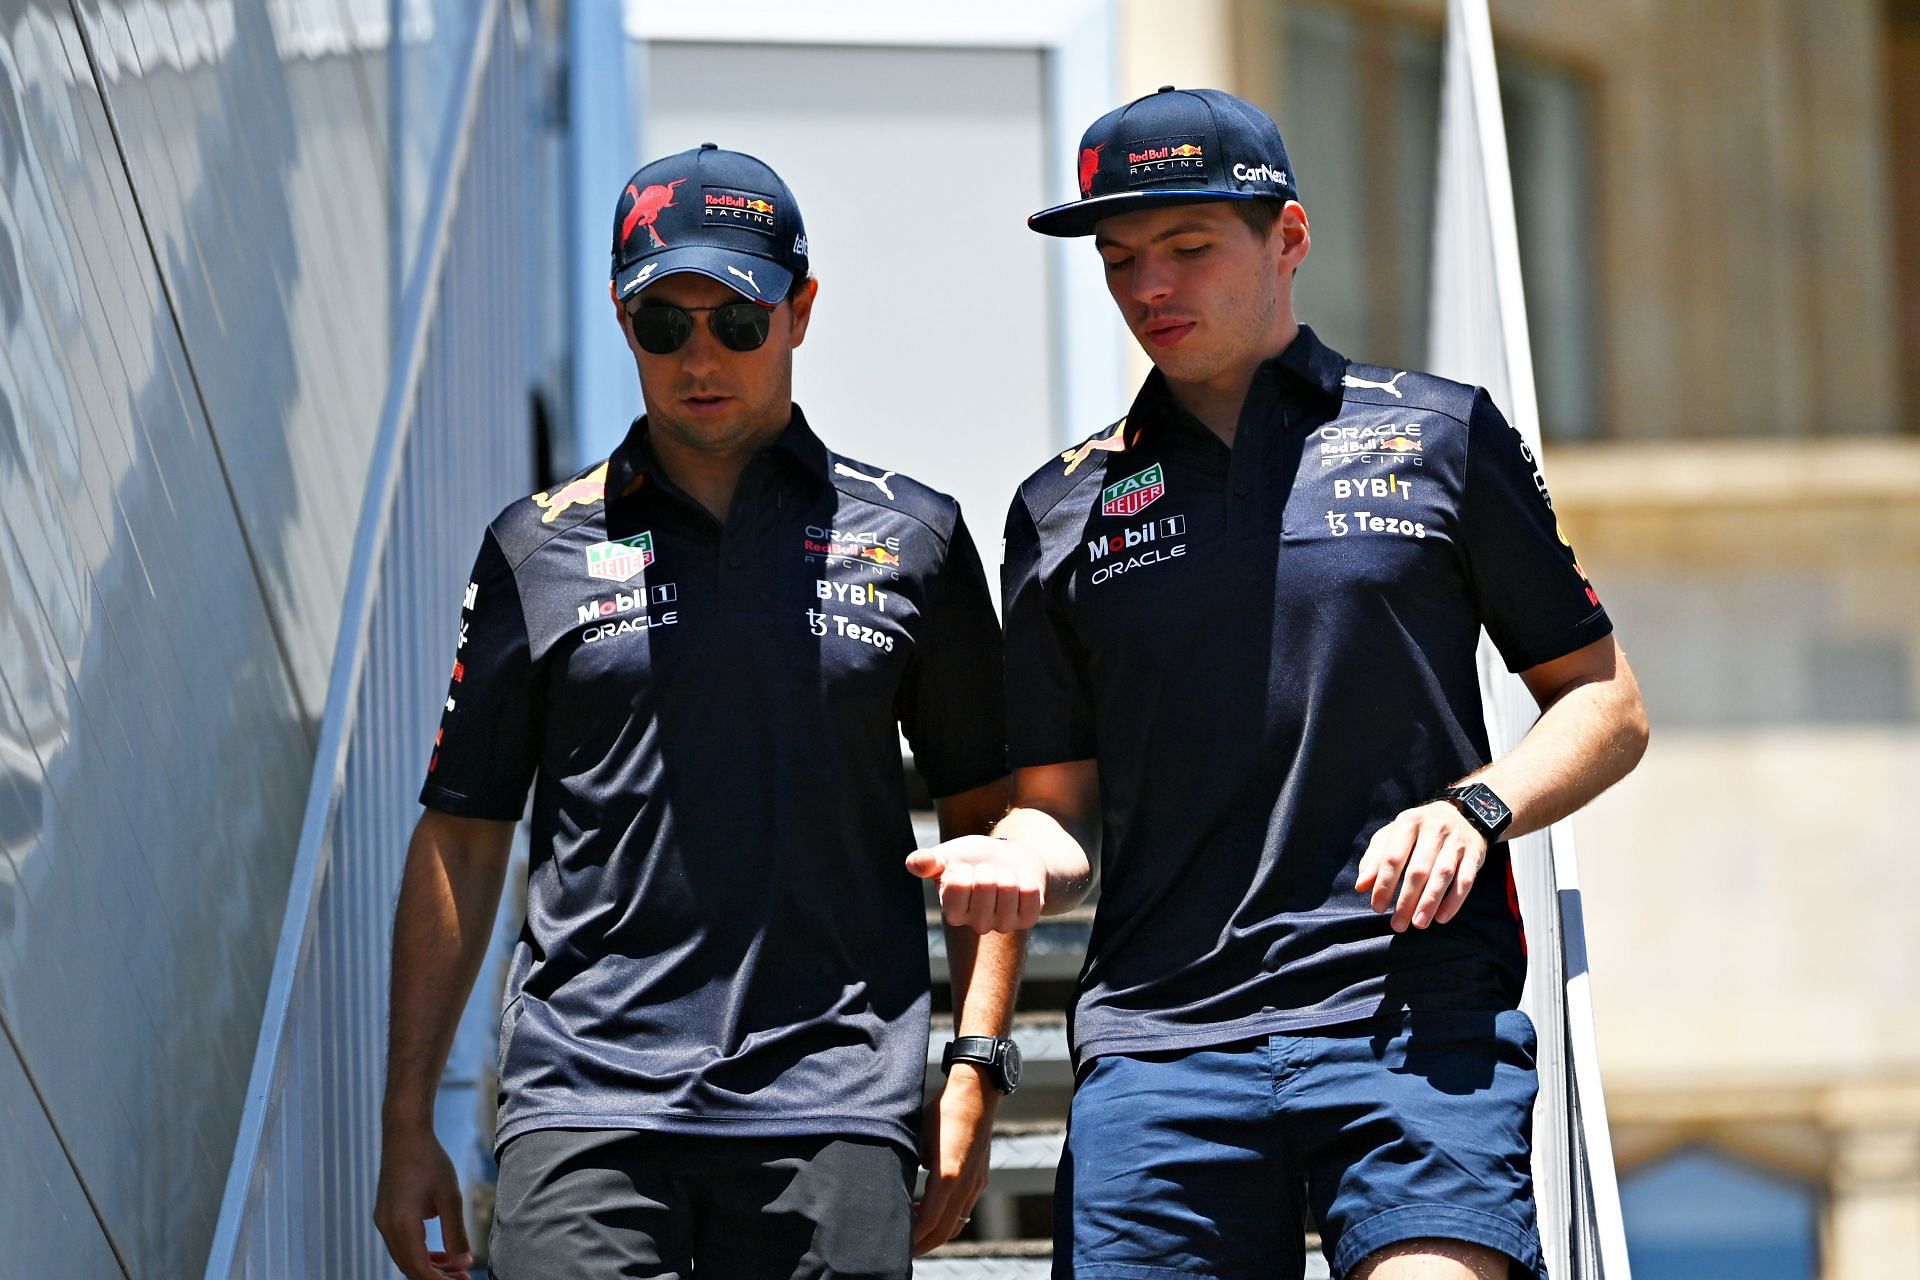 Sergio Perez (left) and Max Verstappen (right) walk in the Paddock ahead of the 2022 F1 Grand Prix of Azerbaijan (Photo by Dan Mullan/Getty Images)